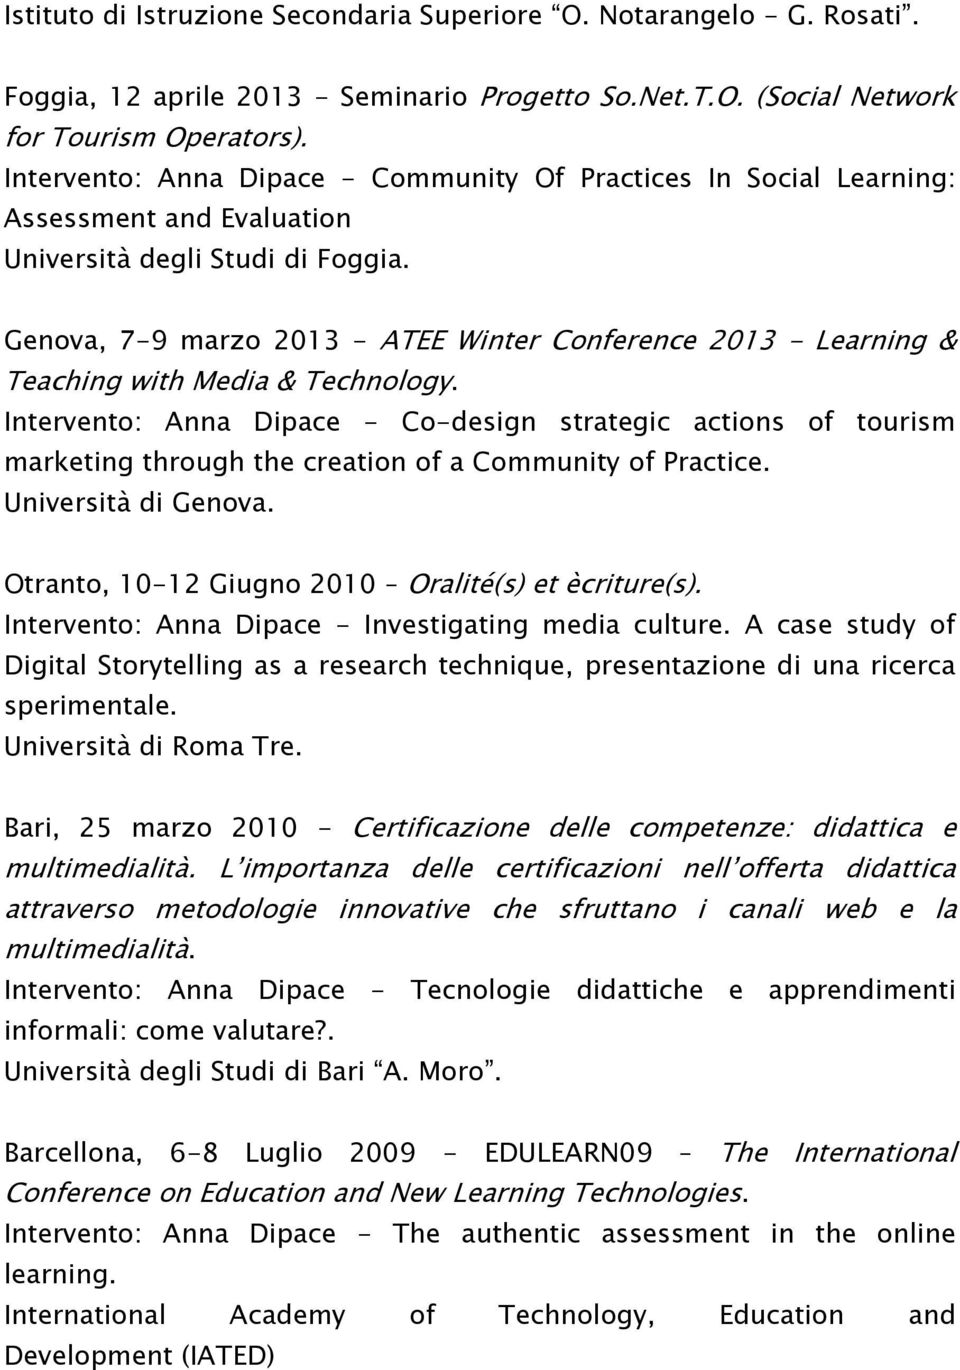 Genova, 7-9 marzo 2013 - ATEE Winter Conference 2013 - Learning & Teaching with Media & Technology.